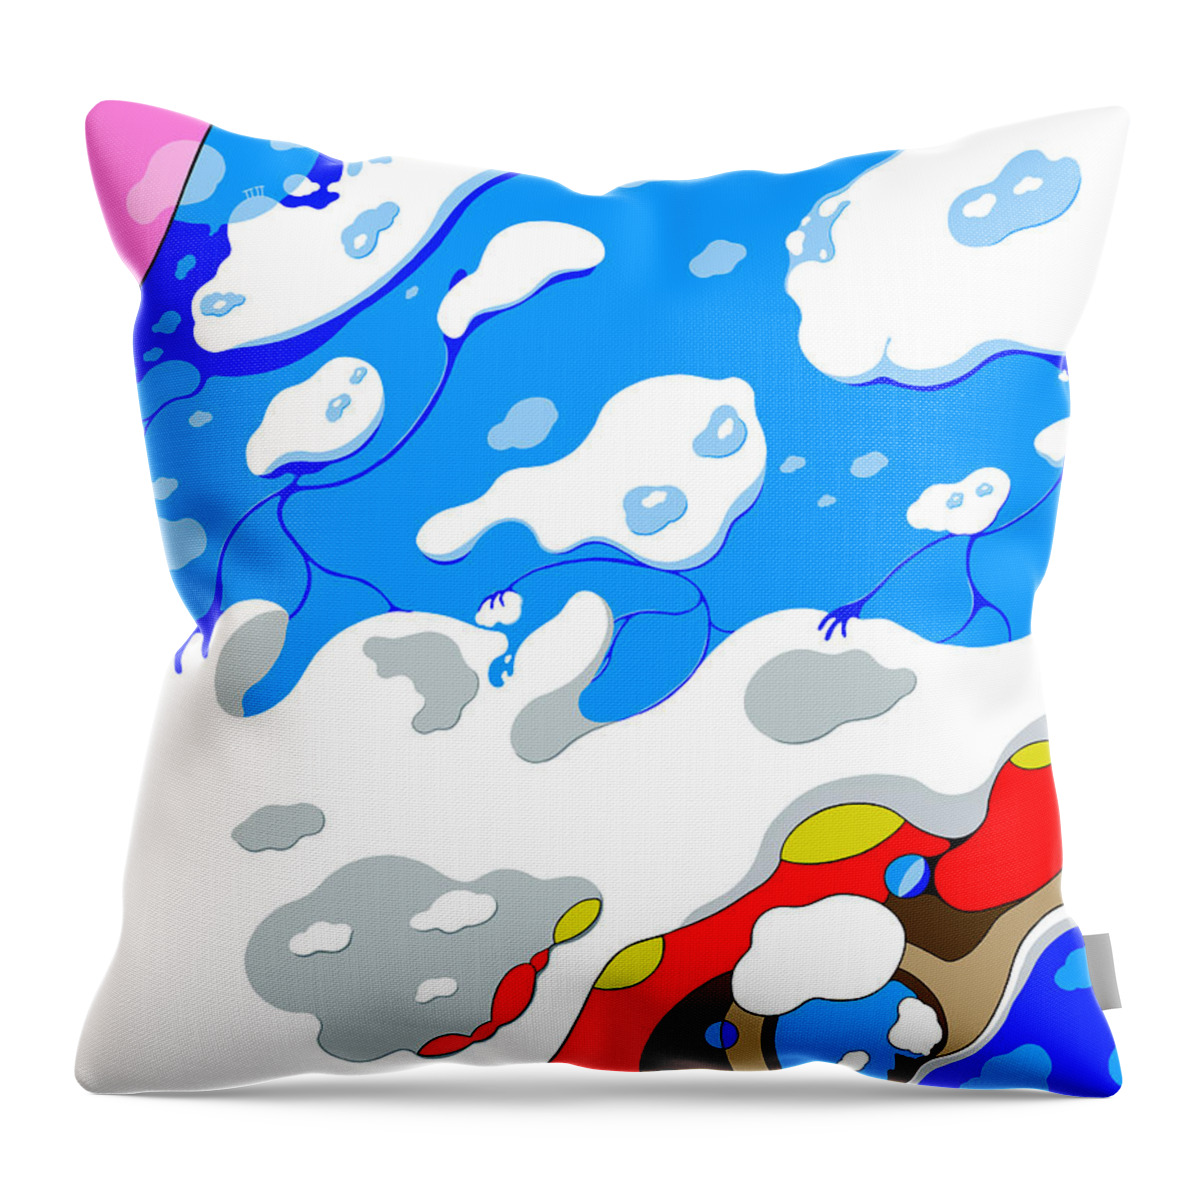 Clouds Throw Pillow featuring the digital art Nephenomics by Craig Tilley